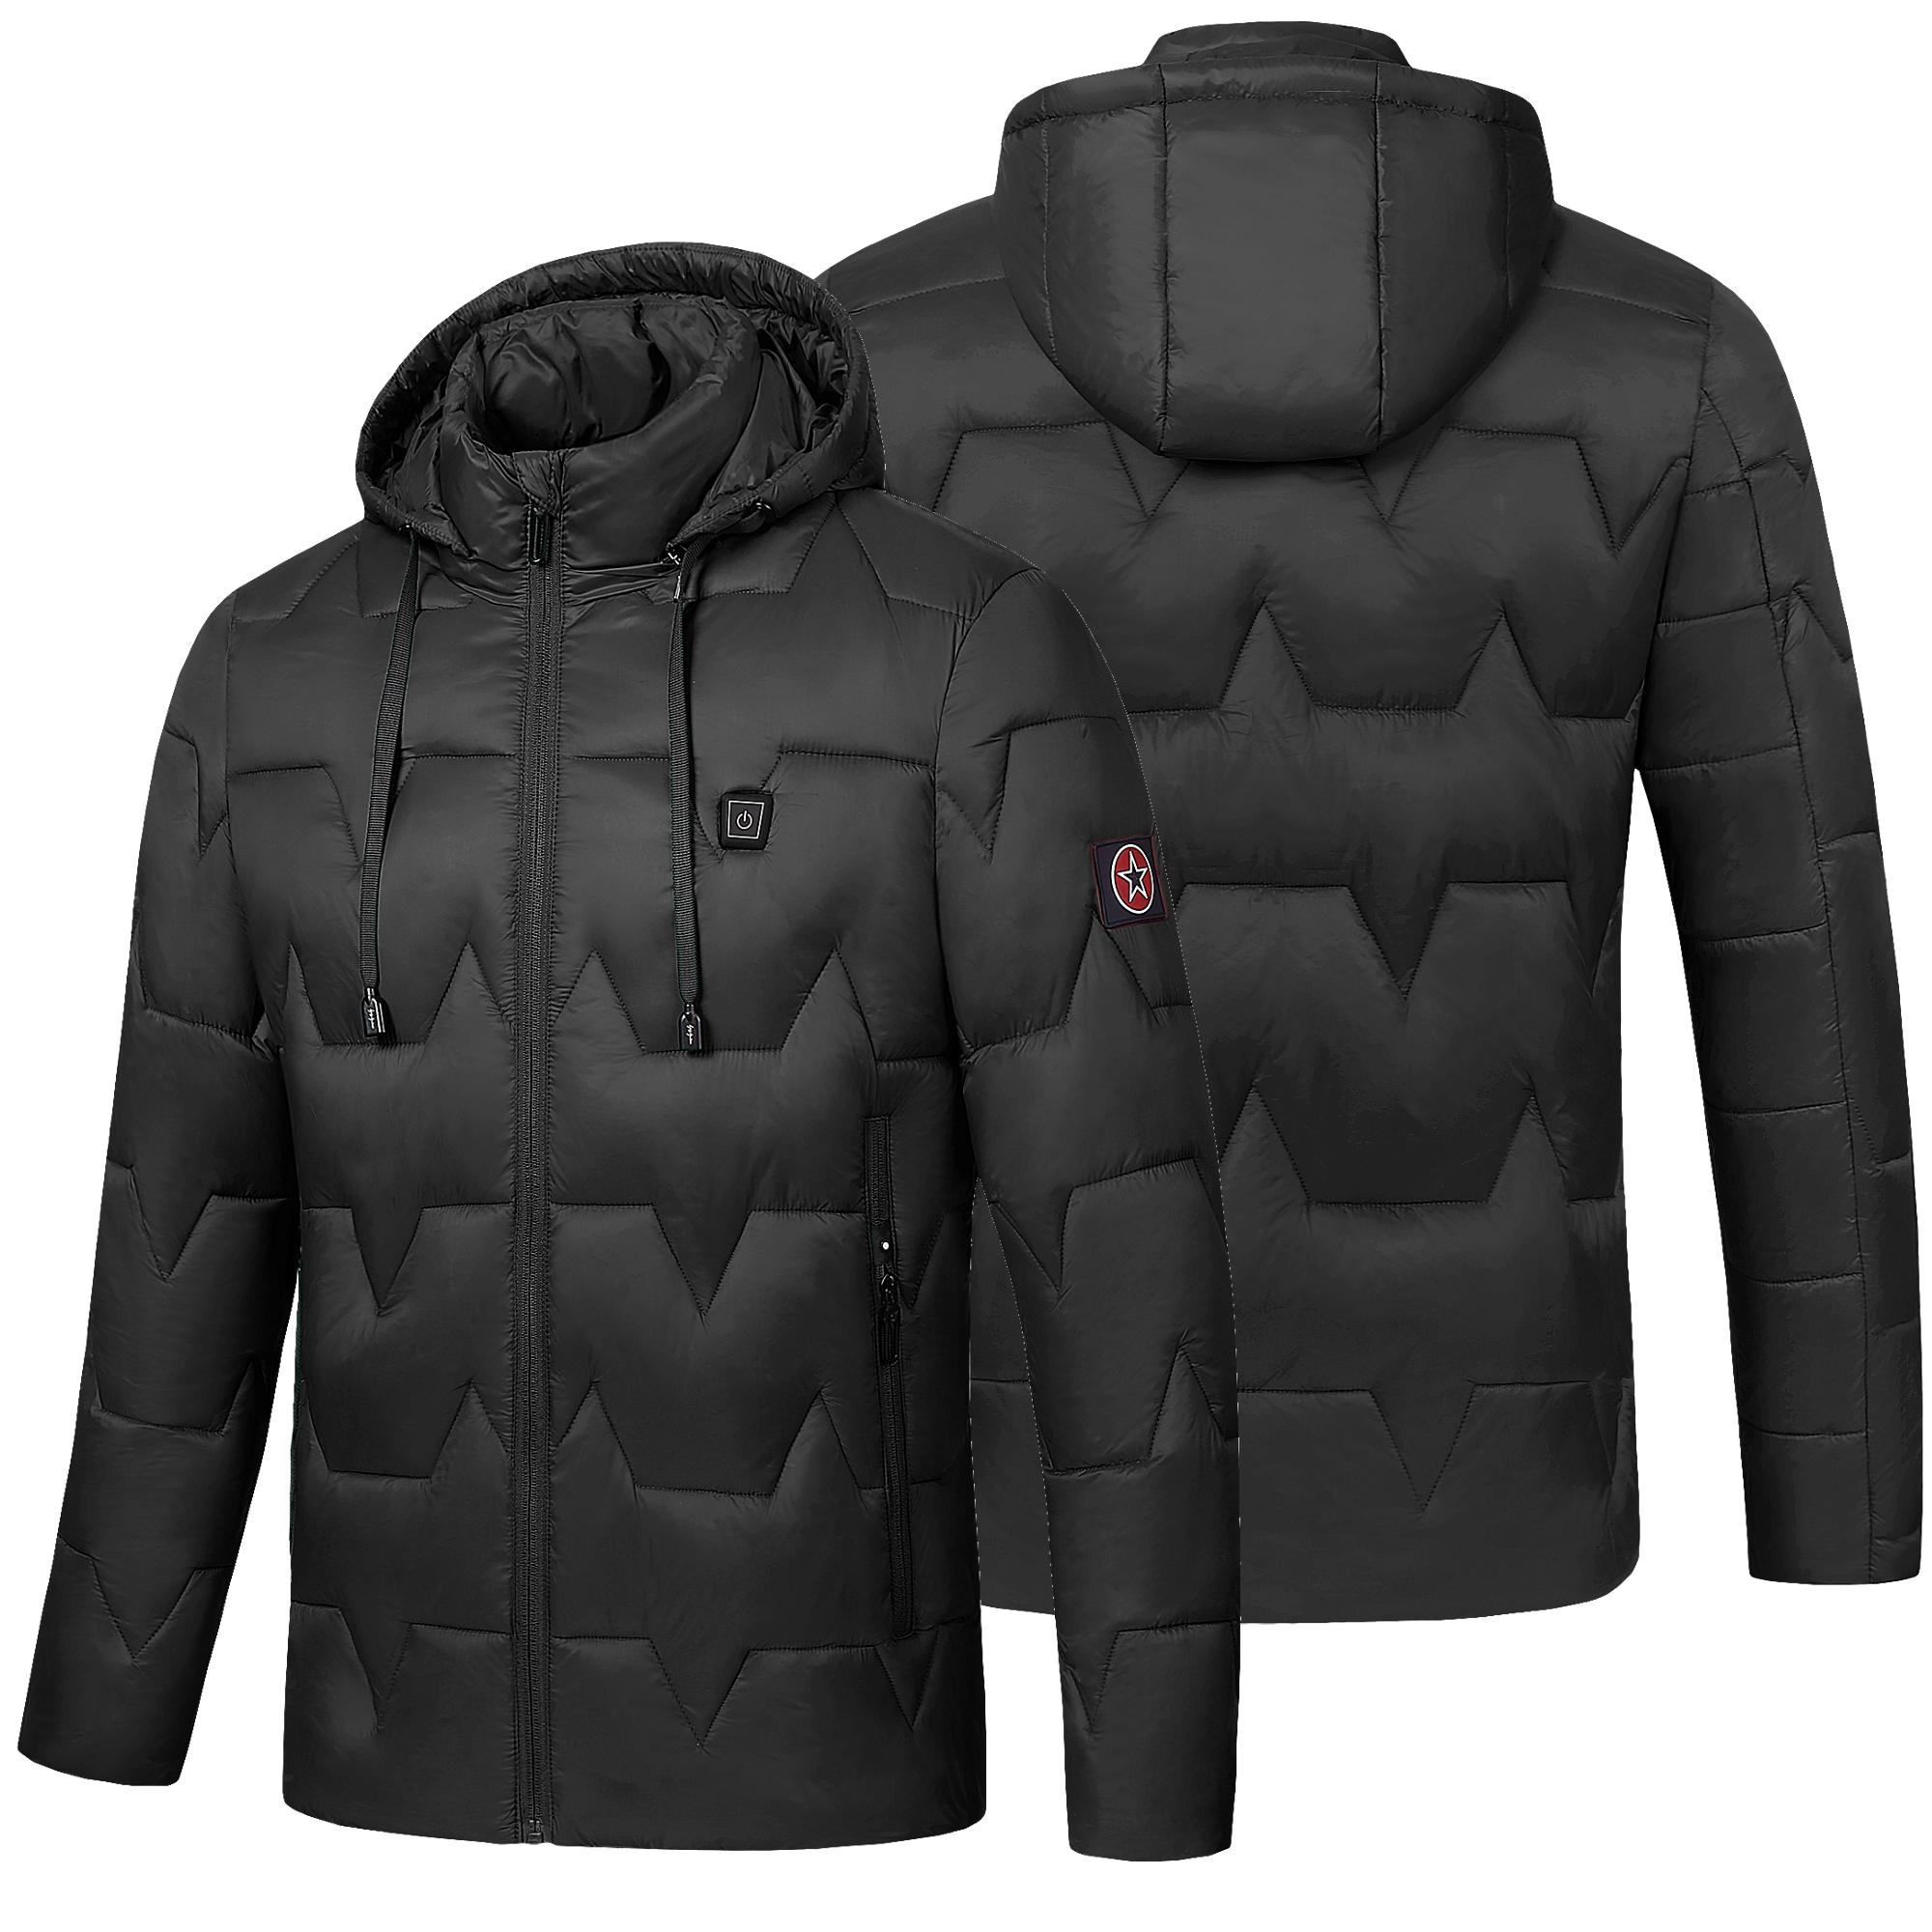 

Men Women USB Electric Heated Jacket Outdoor Coats Long Sleeves Heating Hooded Warm Winter Thermal Clothing Skiing